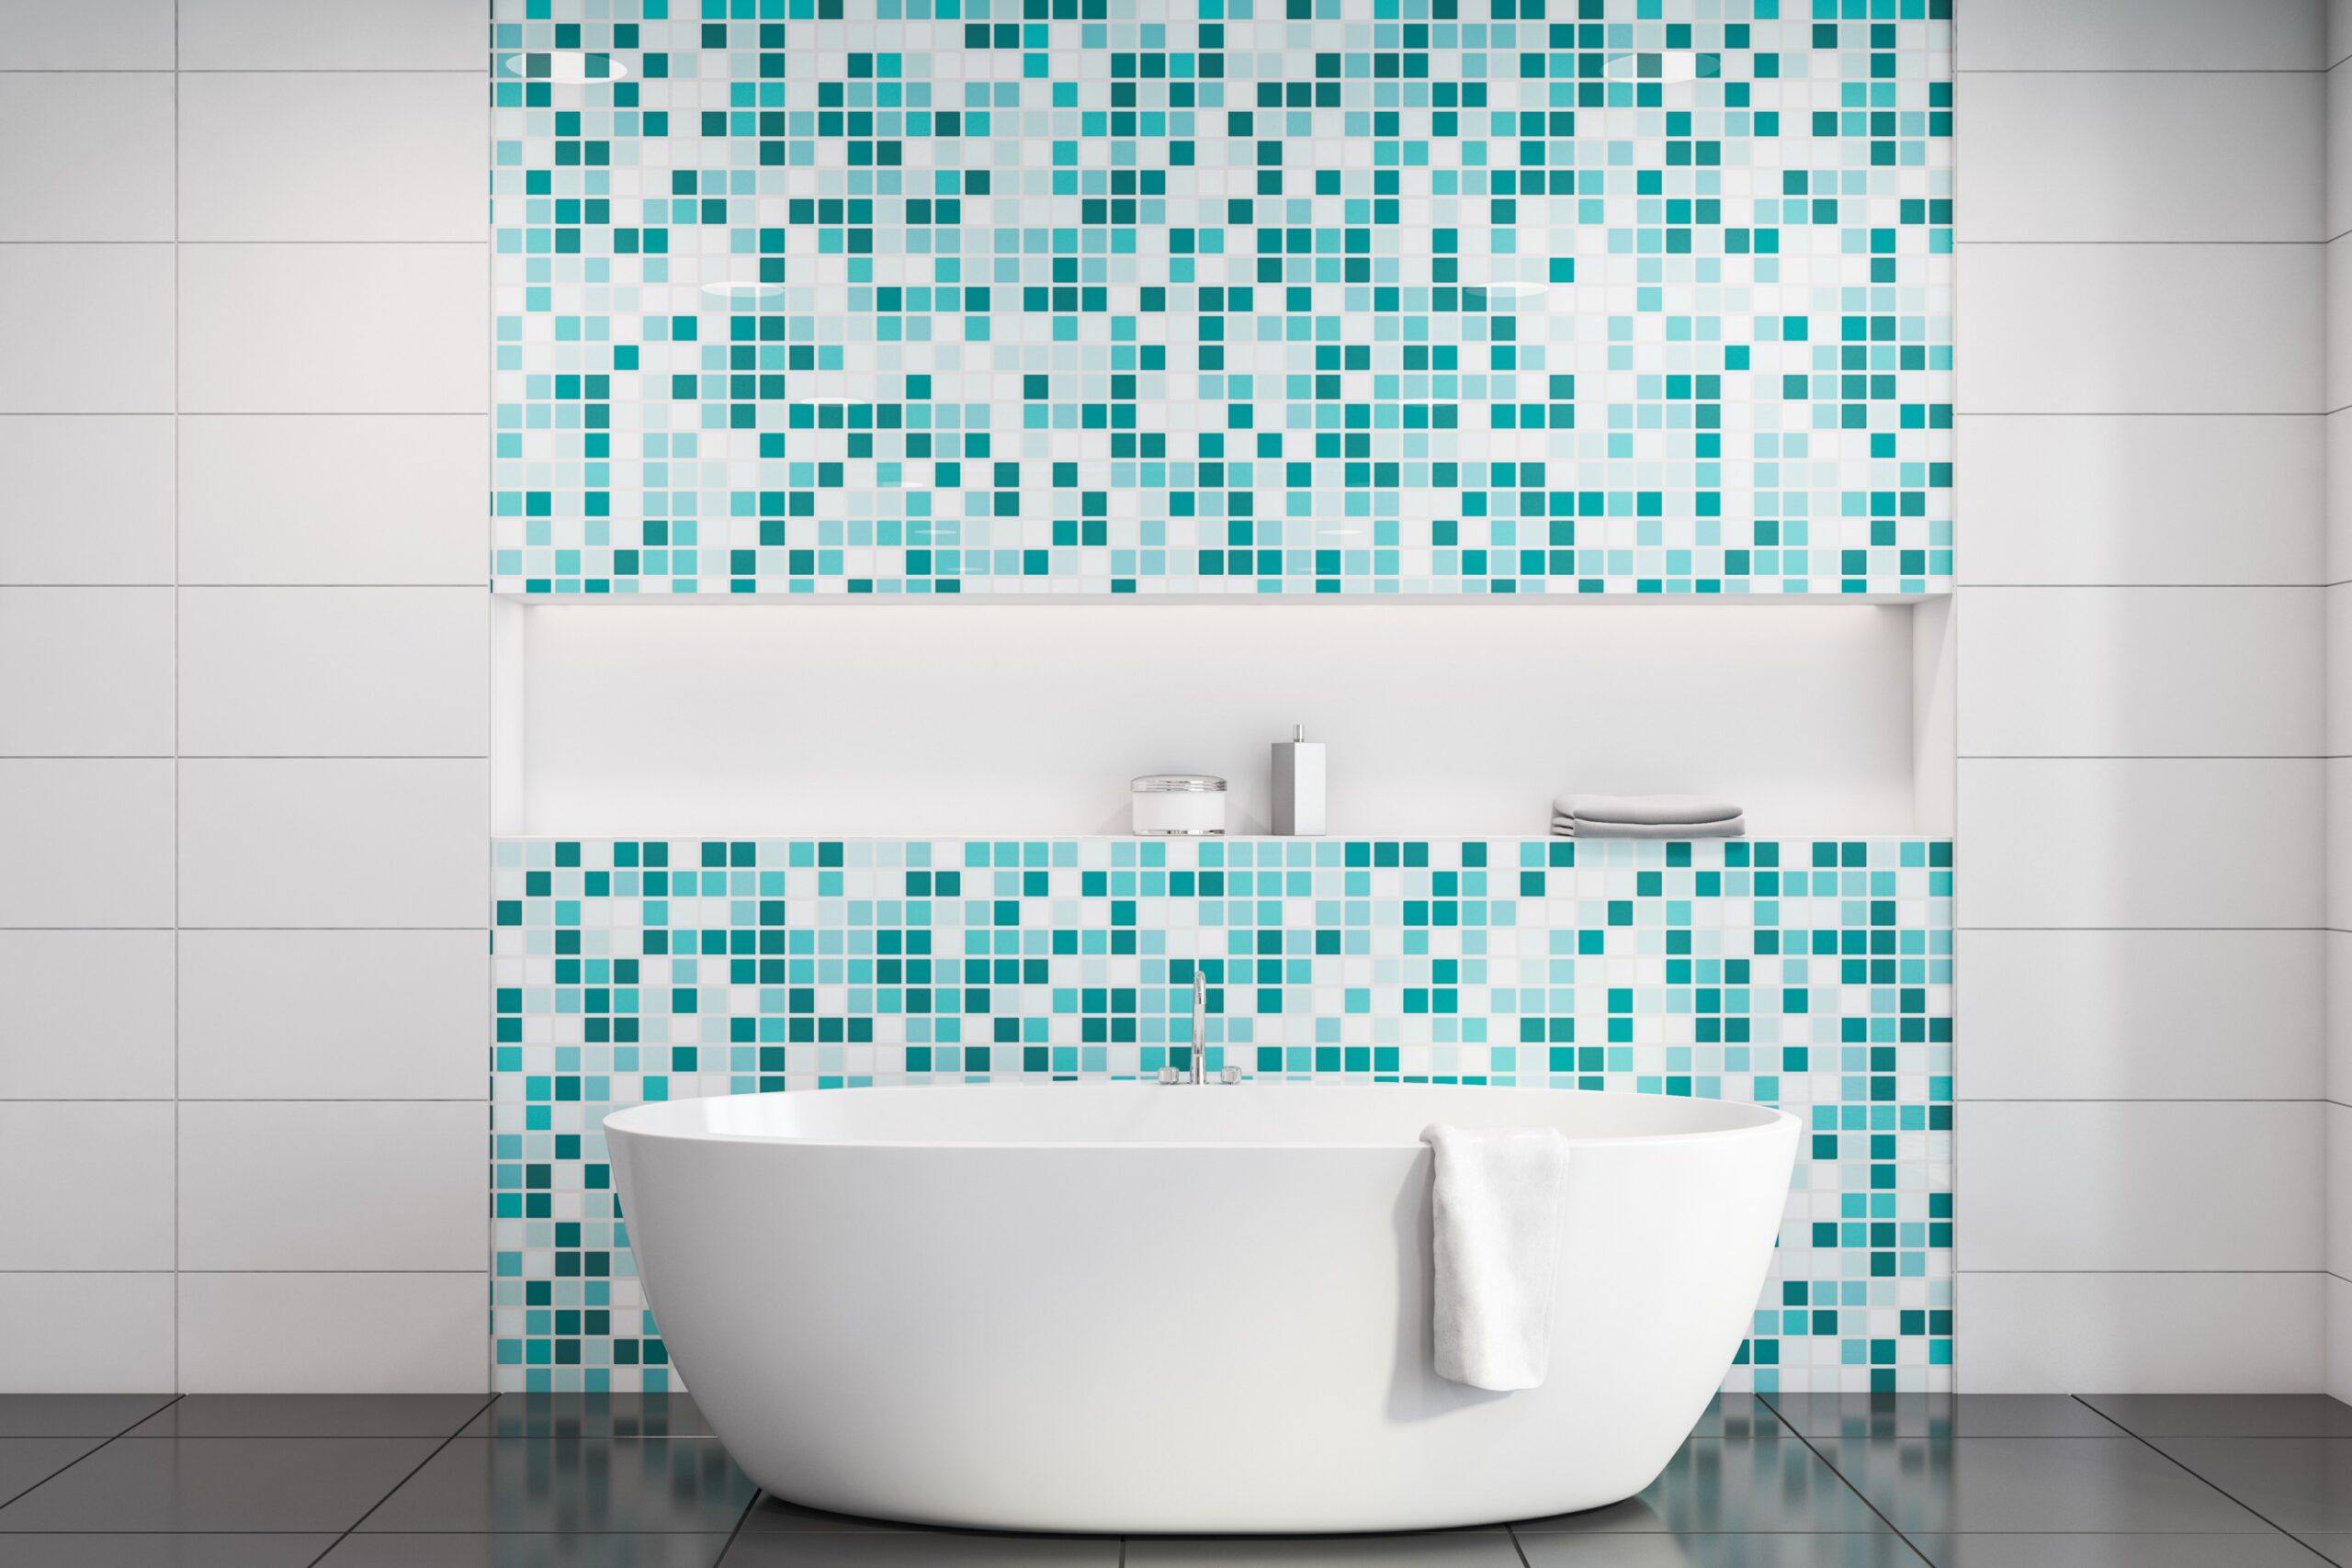 Mosaic Tiling Ideas with Avid Tiling scaled